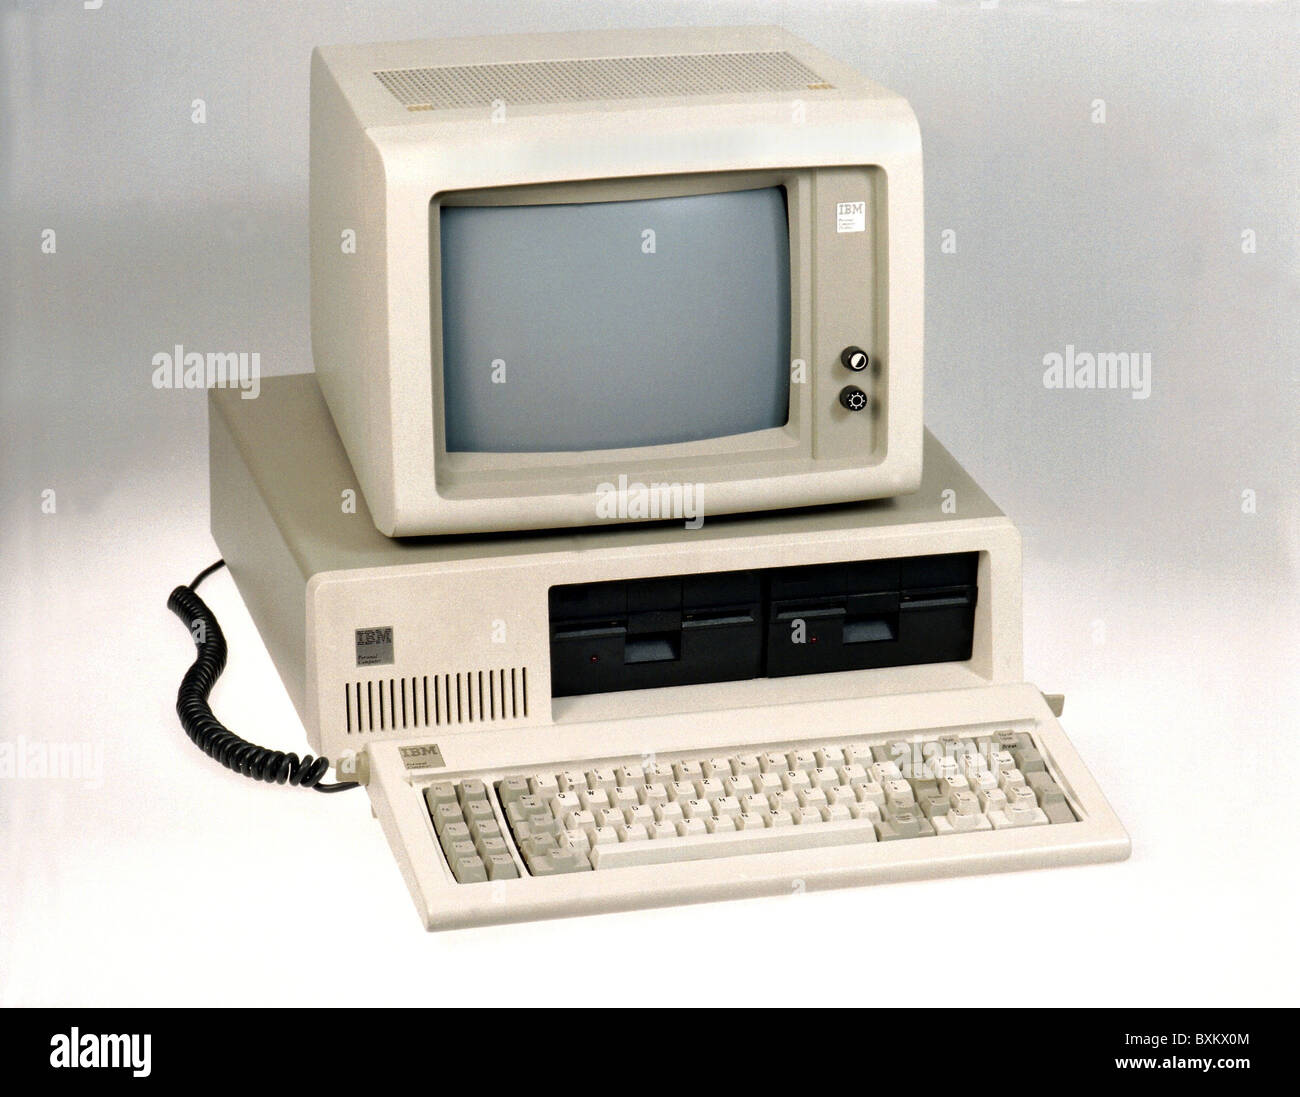 computing / electronics, computer, IBM 5150 PC, USA, 1981, Additional-Rights-Clearences-Not Available Stock Photo